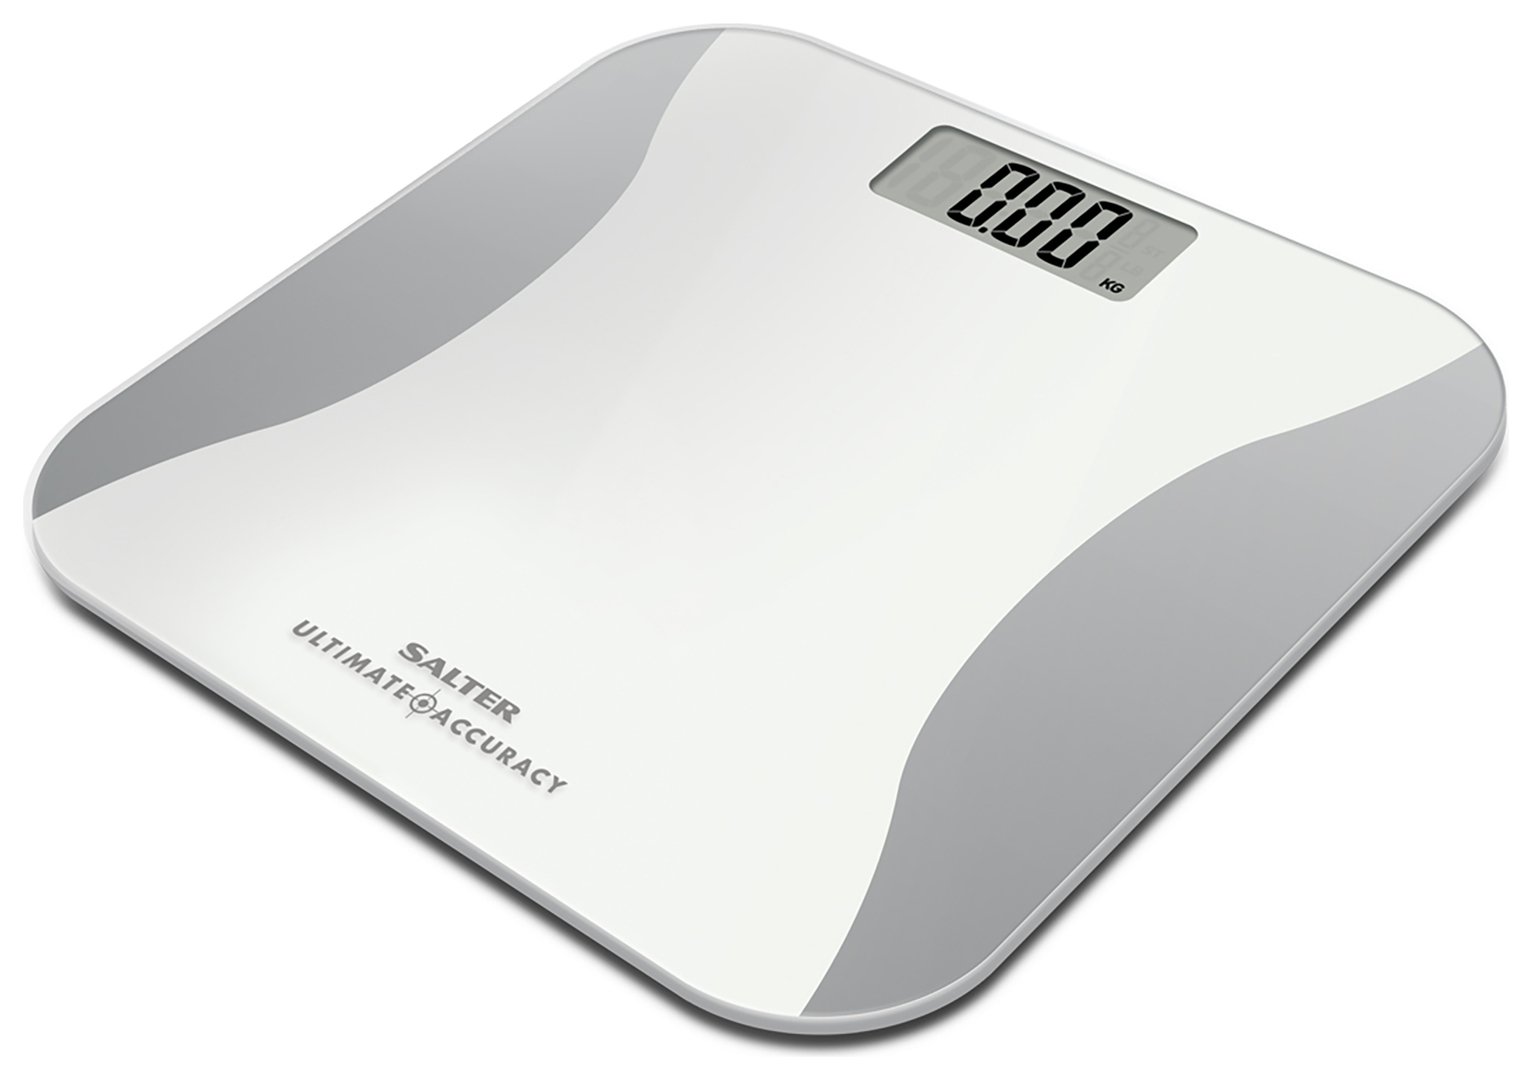 Salter Ultimate Accuracy Digial Bathroom Scales - White